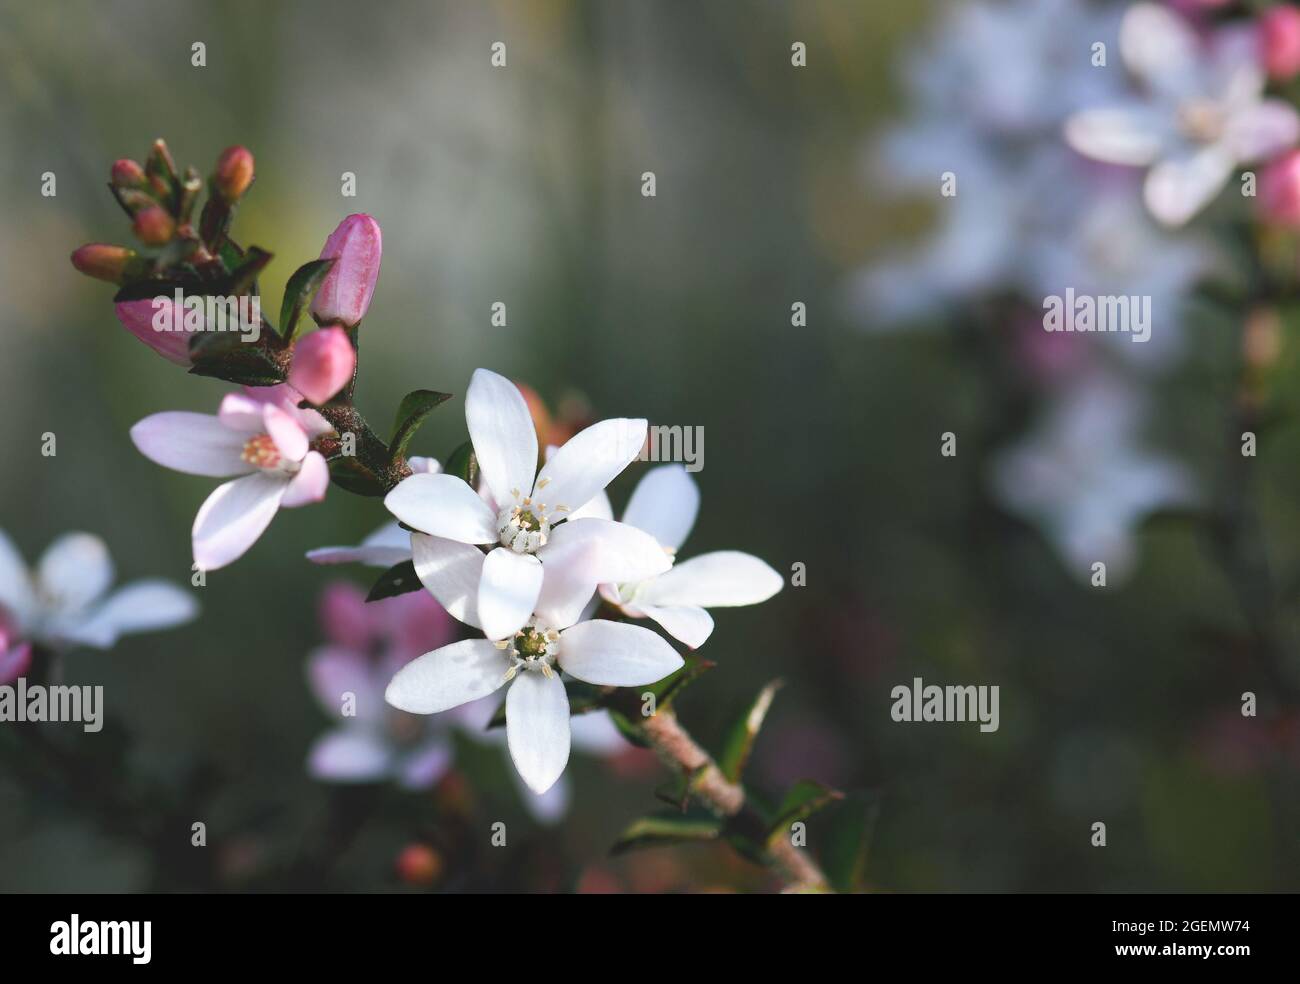 Nature background of white flowers and pink buds of the Australian native Box Leaf Waxflower, Philotheca buxifolia, family Rutaceae, growing in heath, Stock Photo